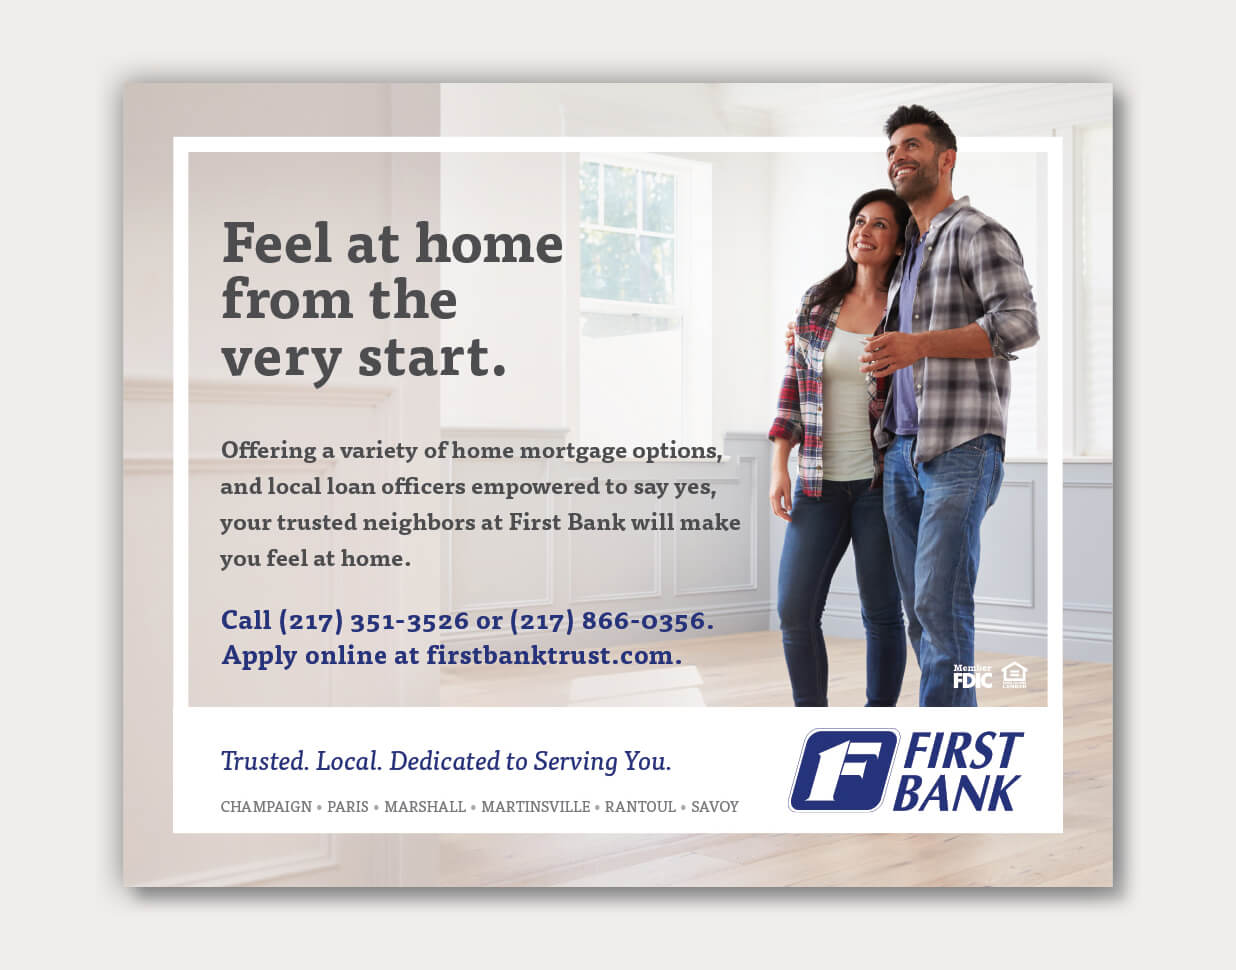 First Bank | Mortgage Campaign